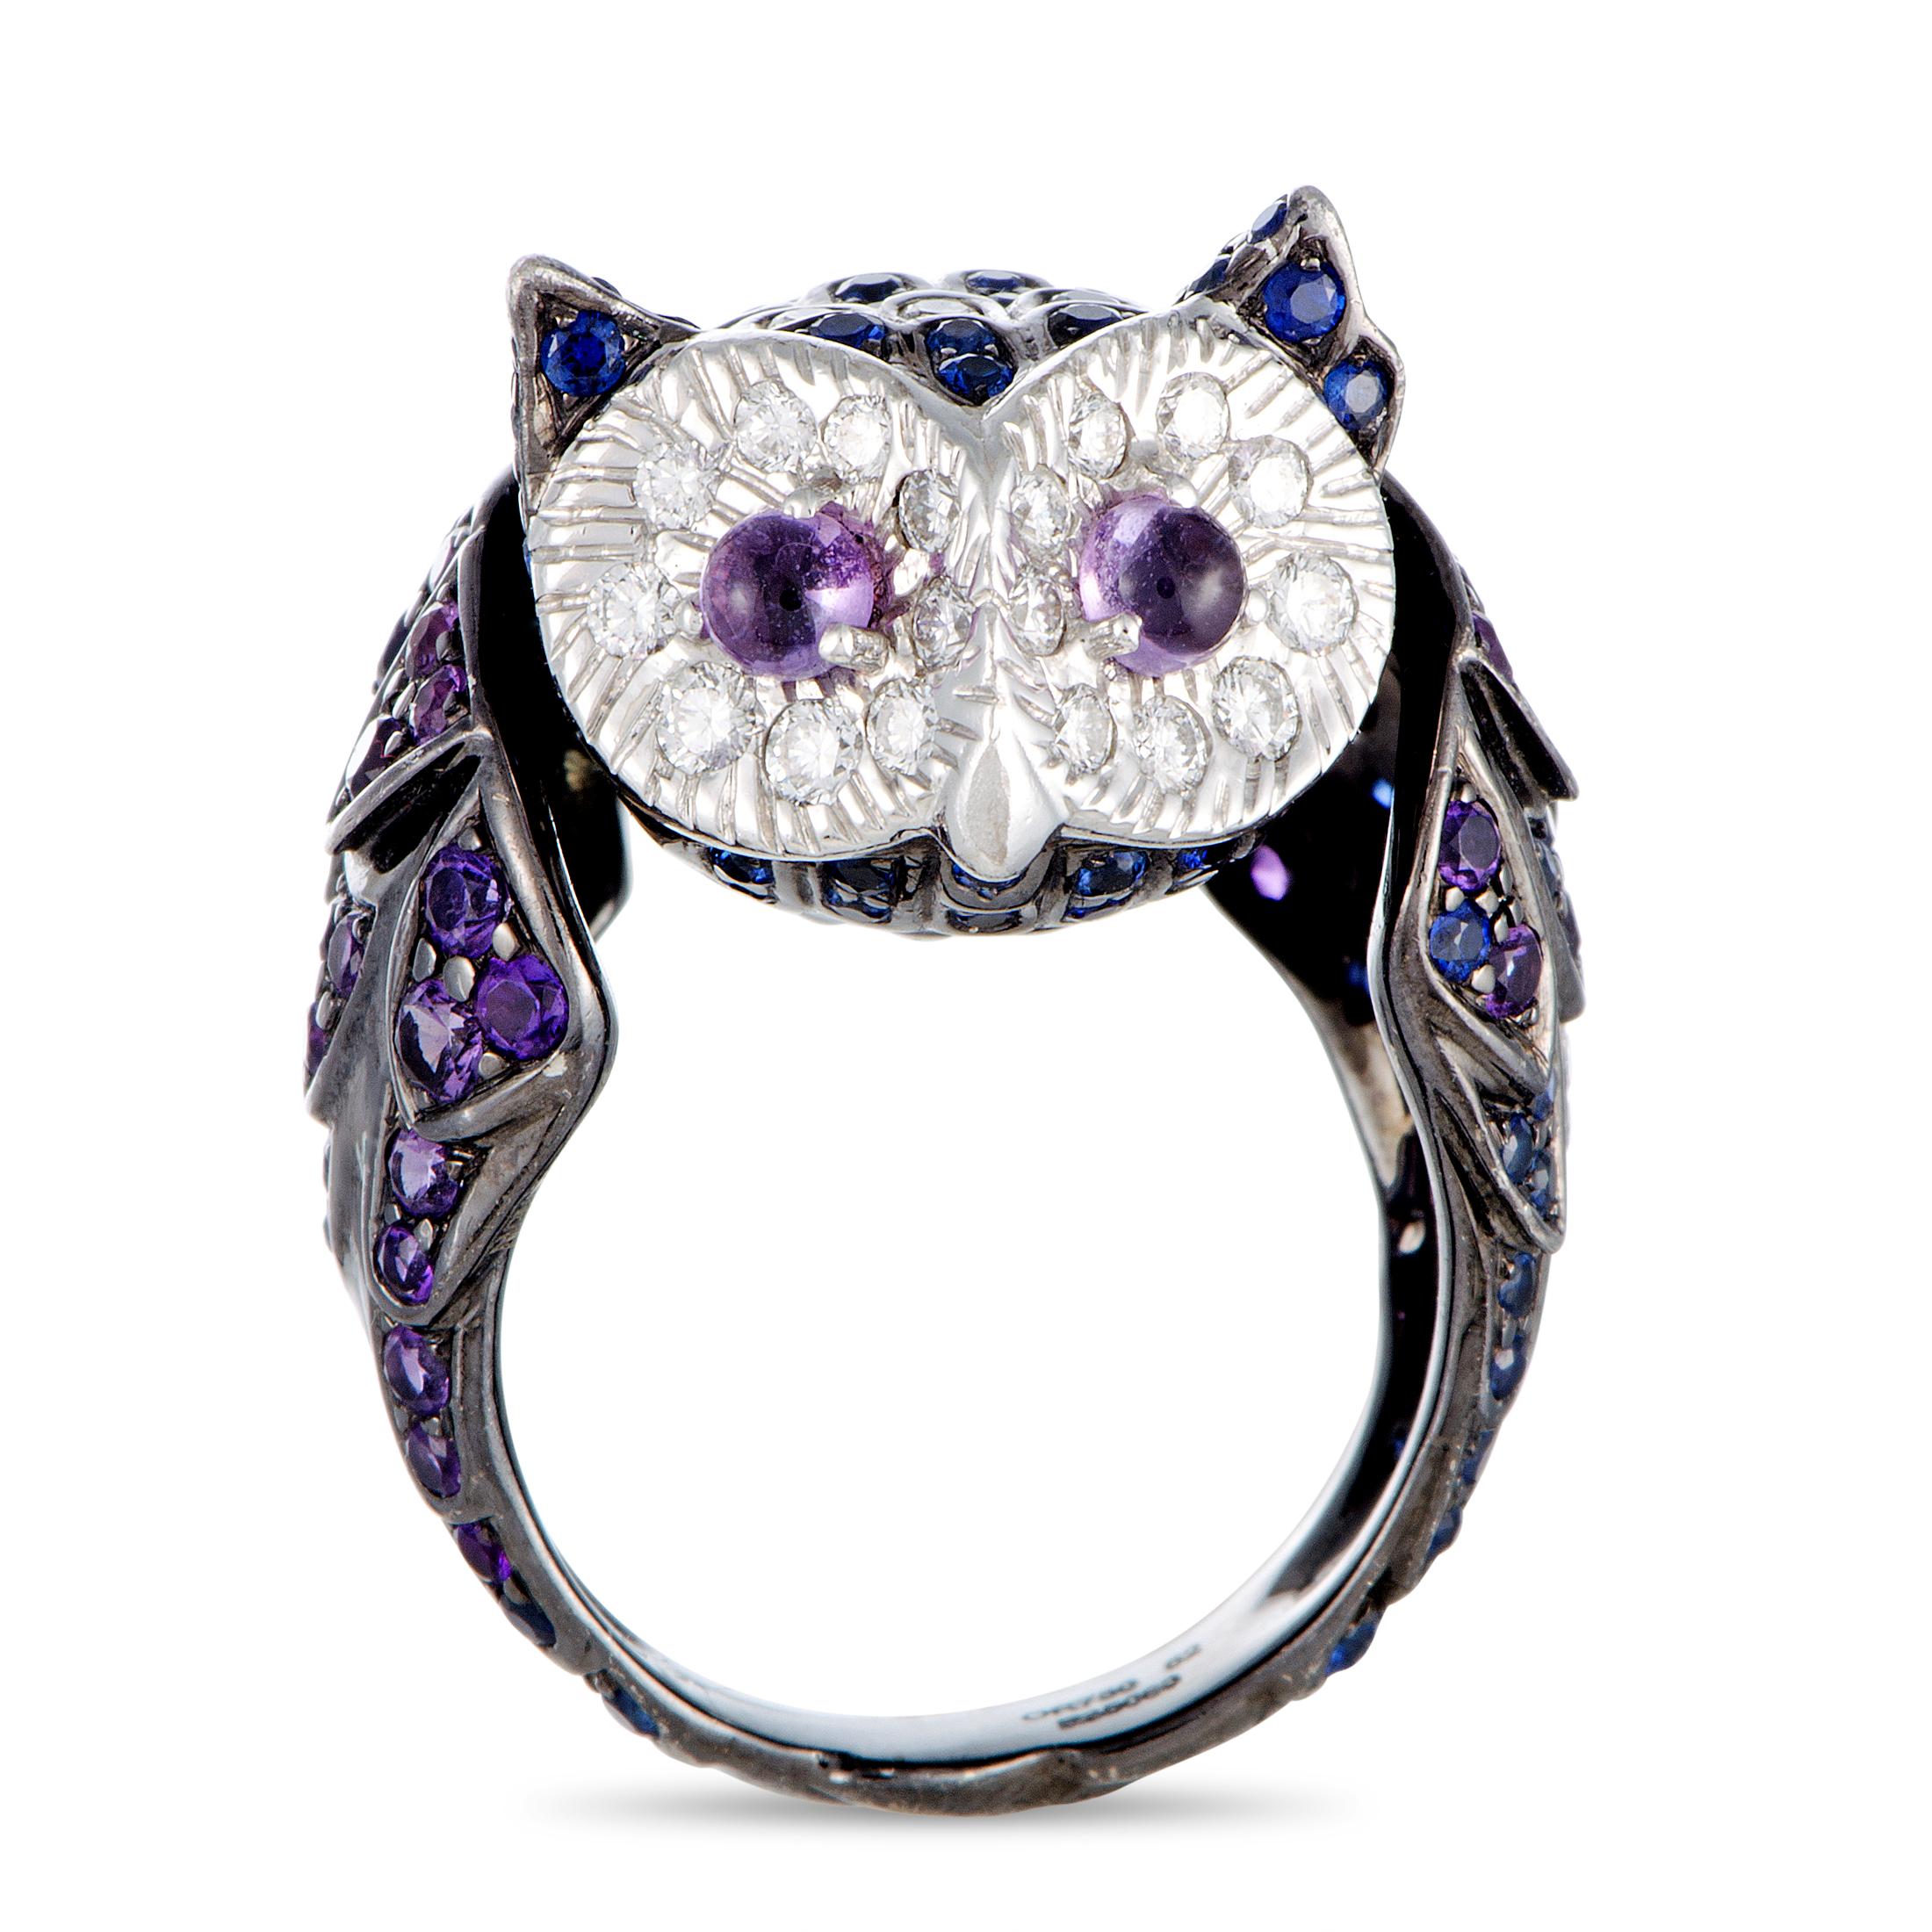 This Boucheron ring is made of rhodium-plated 18K white gold and embellished with diamonds, sapphires, and amethysts. The ring weighs 19.3 grams and boasts band thickness of 4 mm and top height of 10 mm, while top dimensions measure 25 by 20